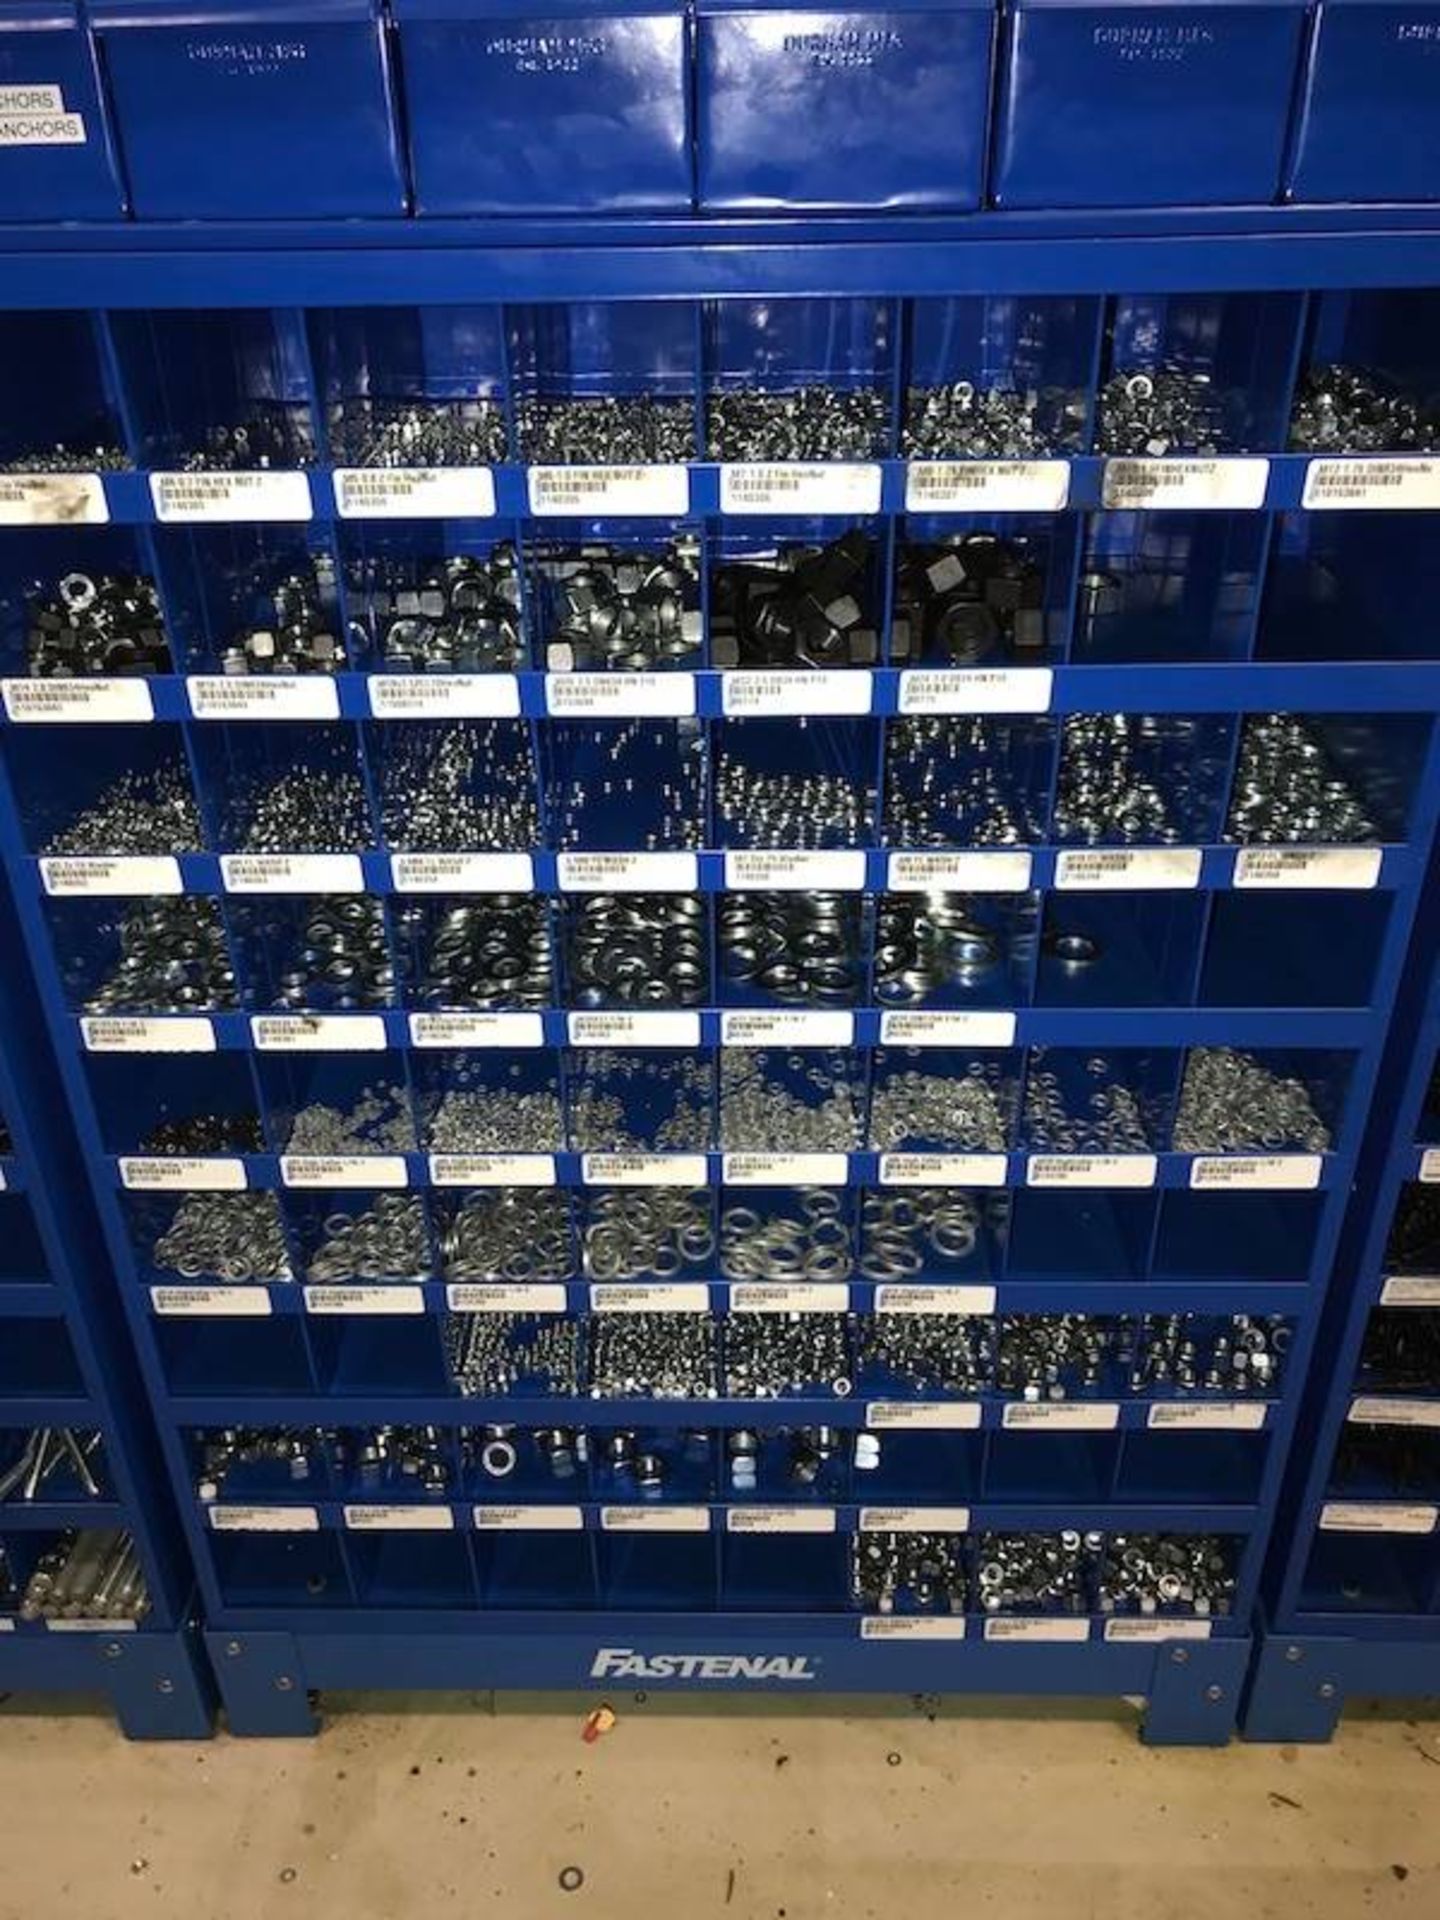 Contents of Fastenal Parts Bins - Image 66 of 70